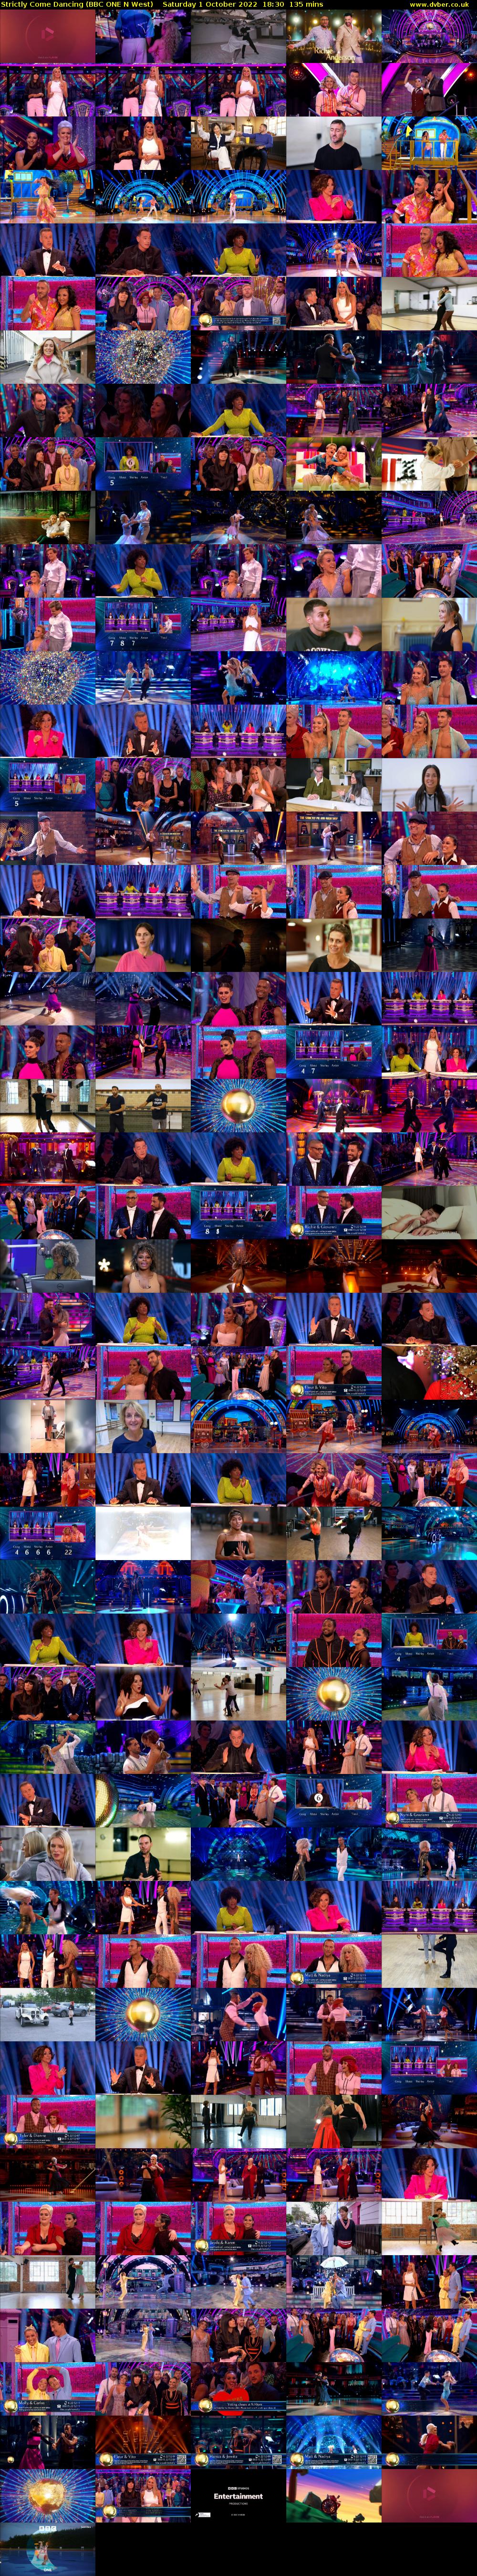 Strictly Come Dancing (BBC ONE N West) Saturday 1 October 2022 18:30 - 20:45